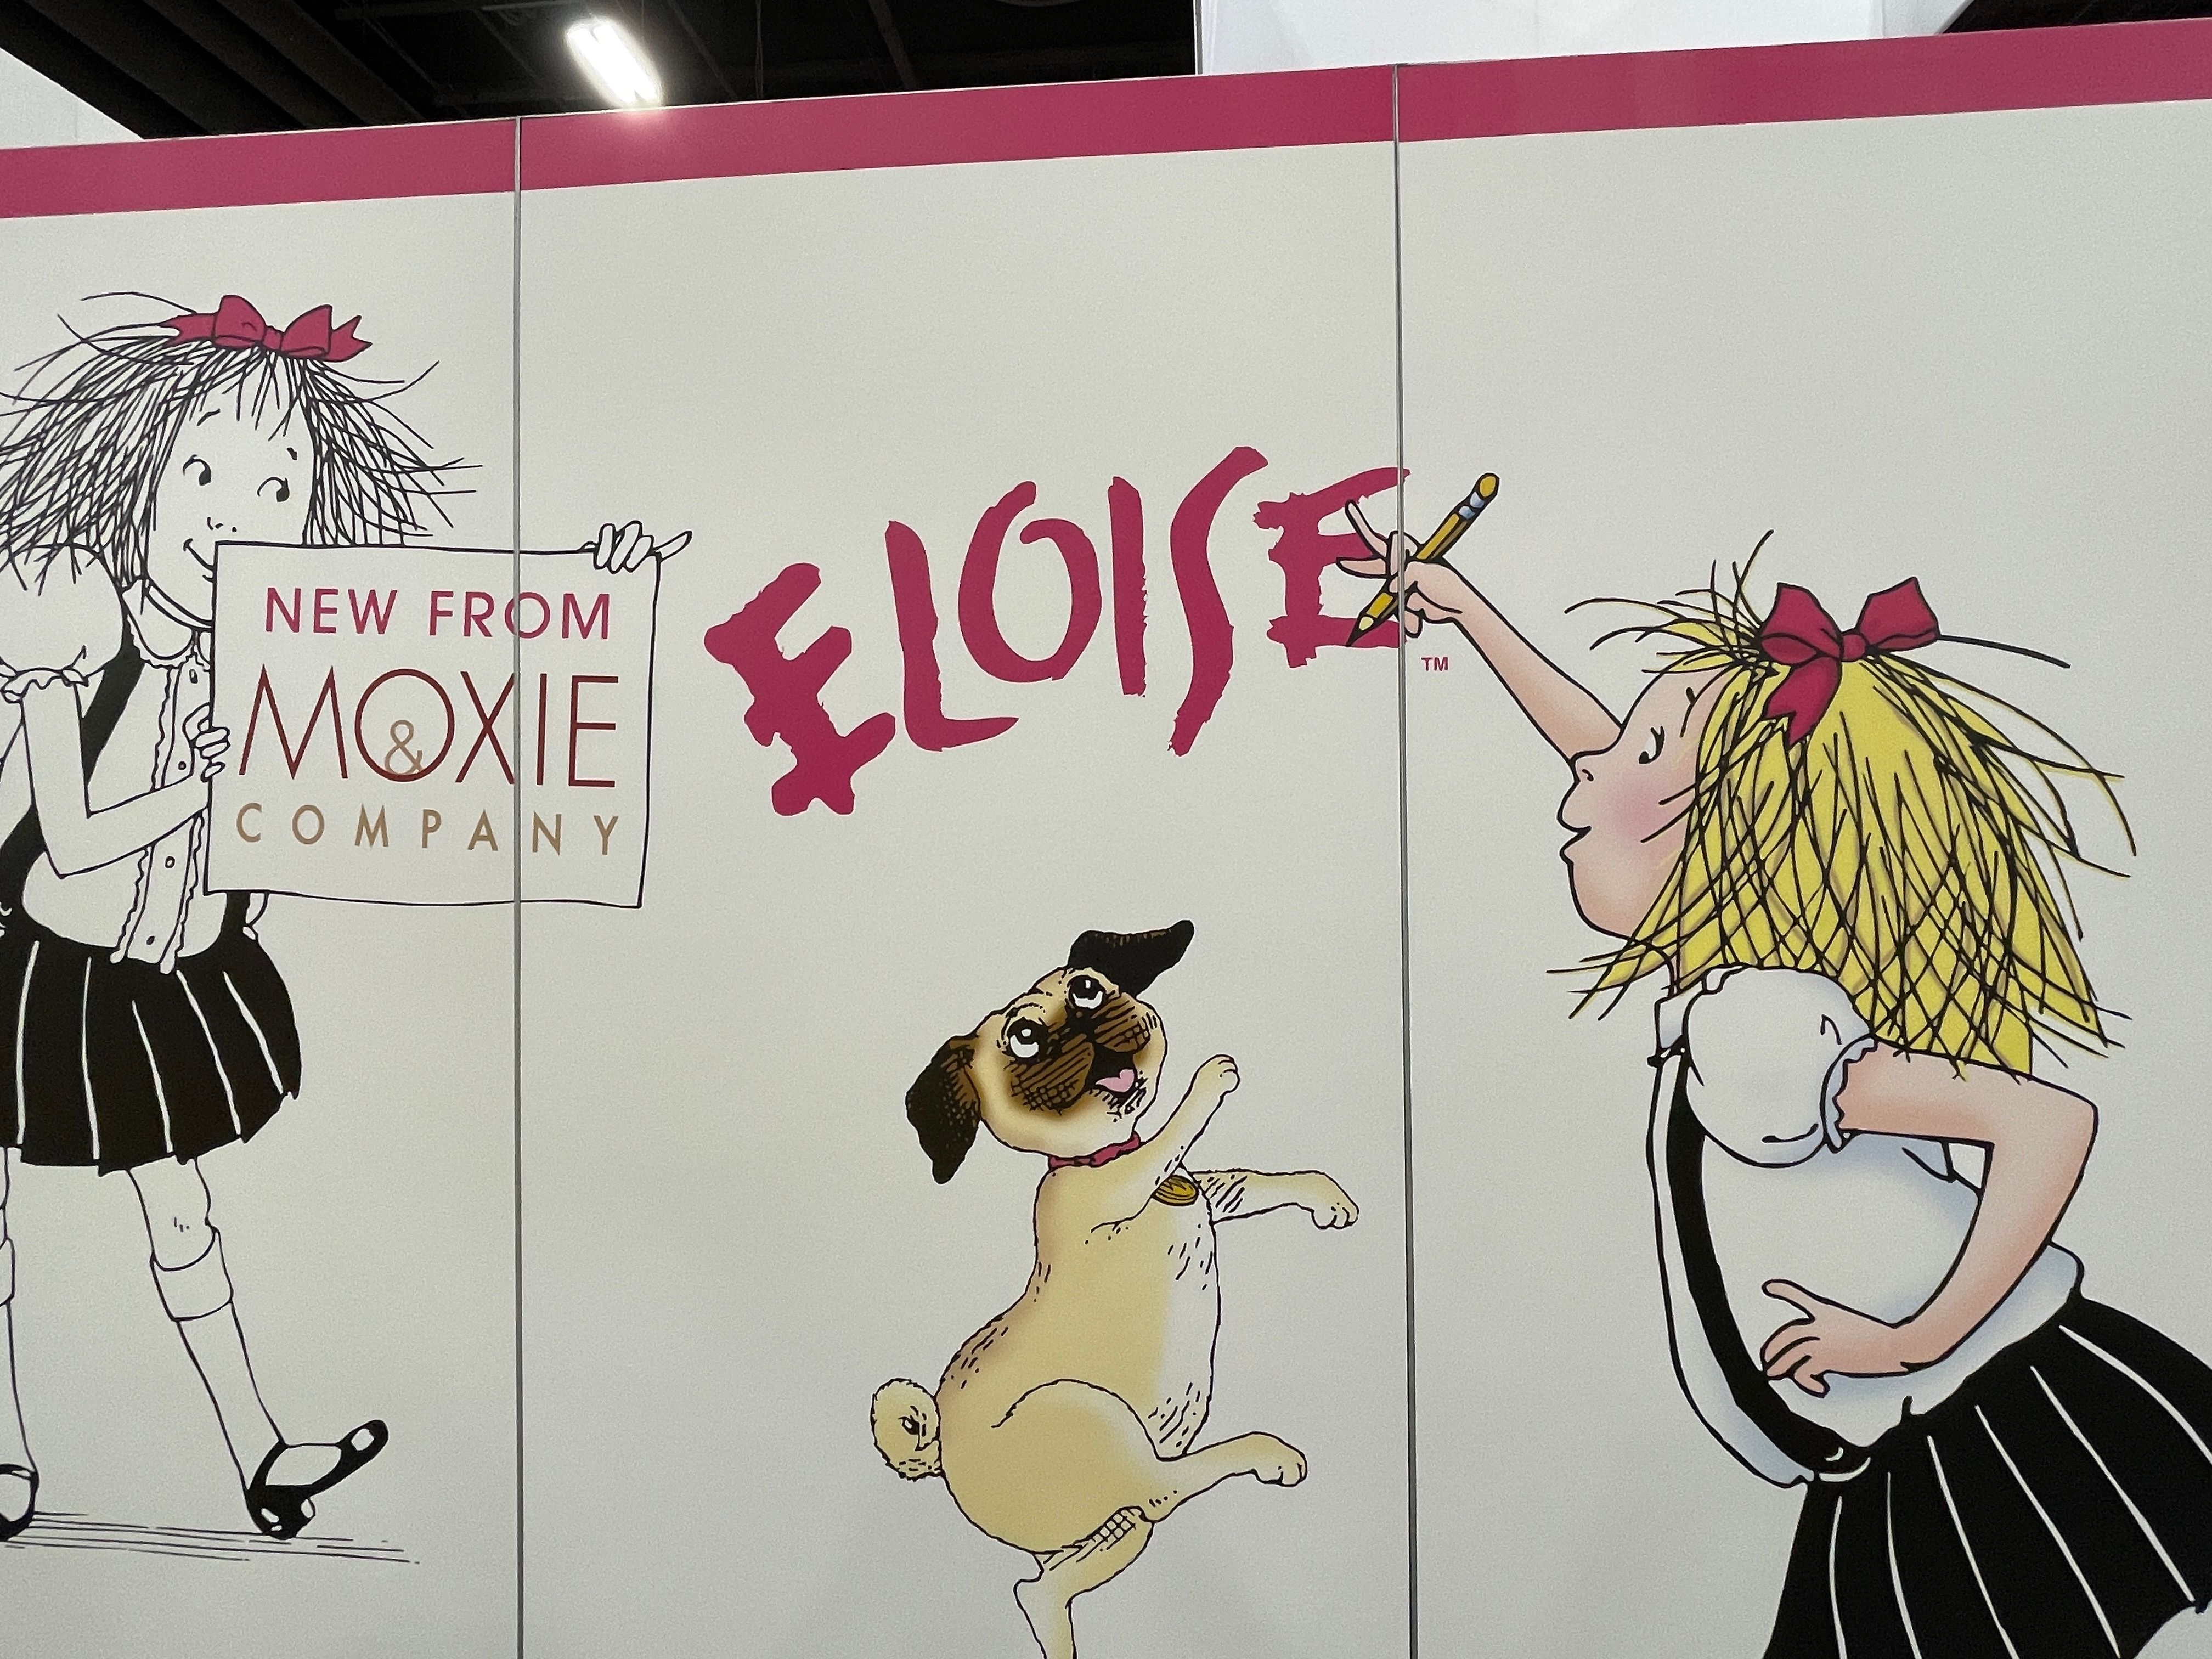 licensing expo image (15)